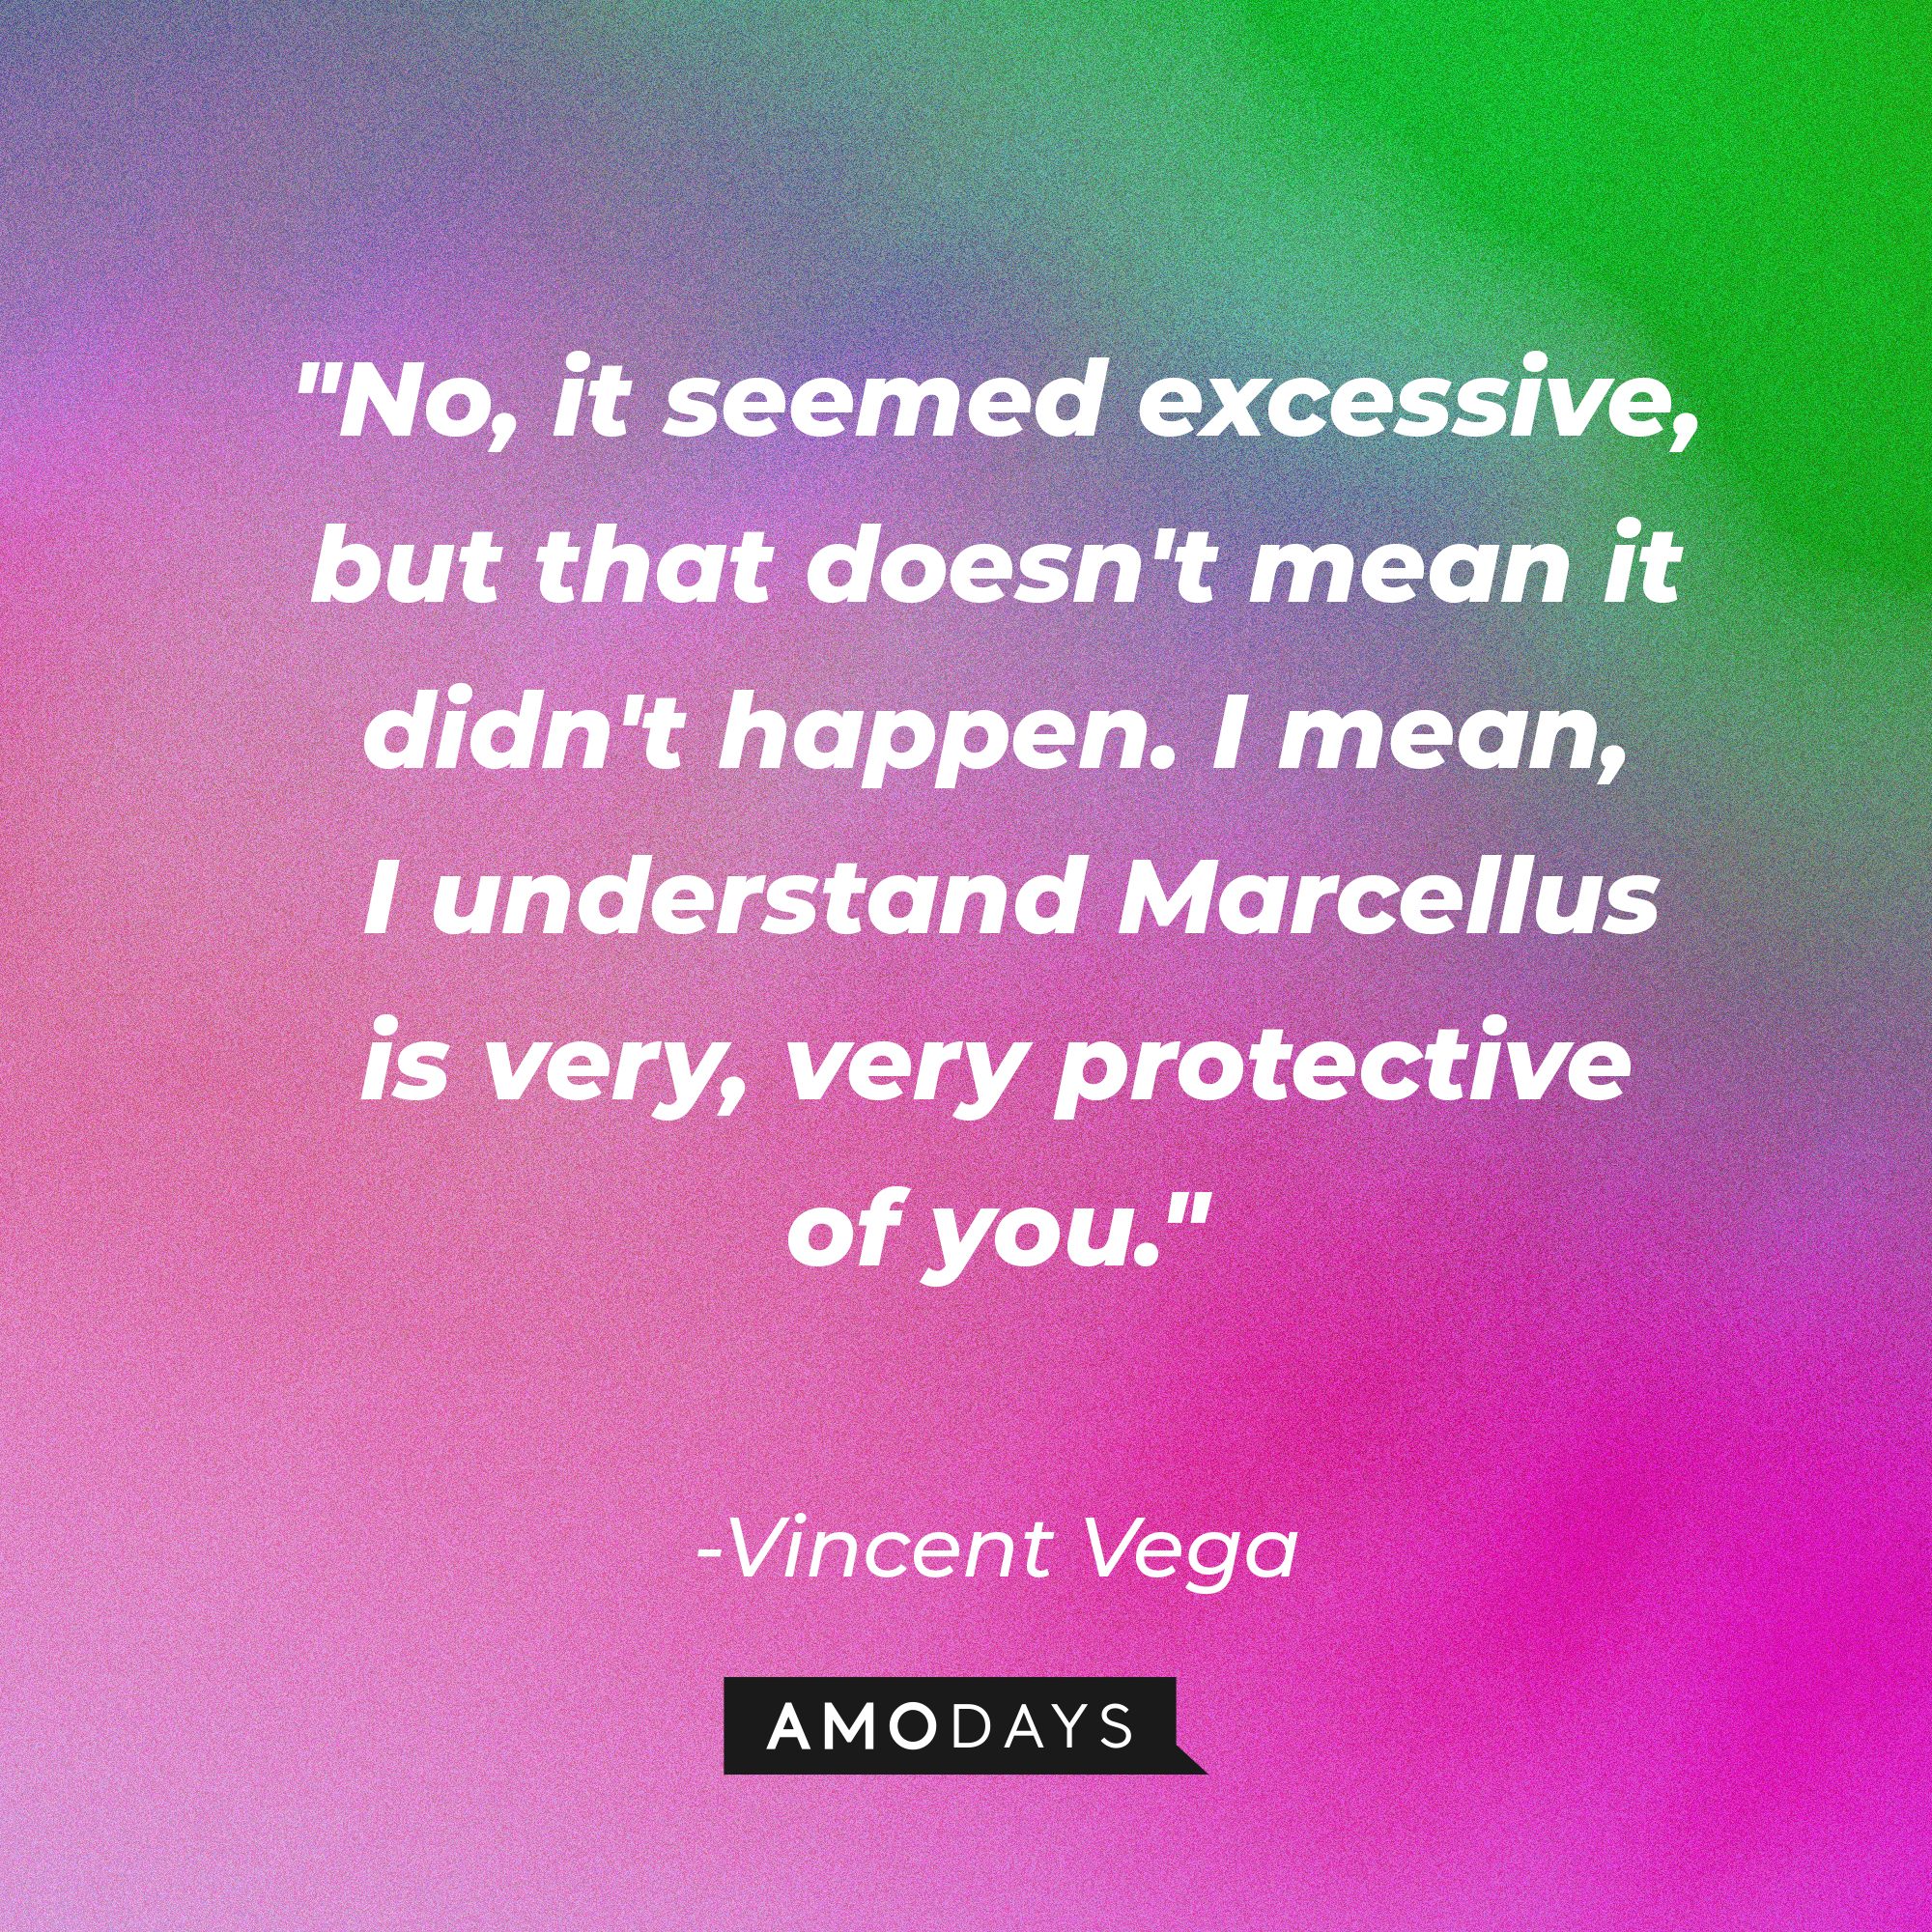 Vincent Vega's quote: "No, it seemed excessive, but that doesn't mean it didn't happen. I mean, I understand Marcellus is very, very protective of you." | Source: AmoDays